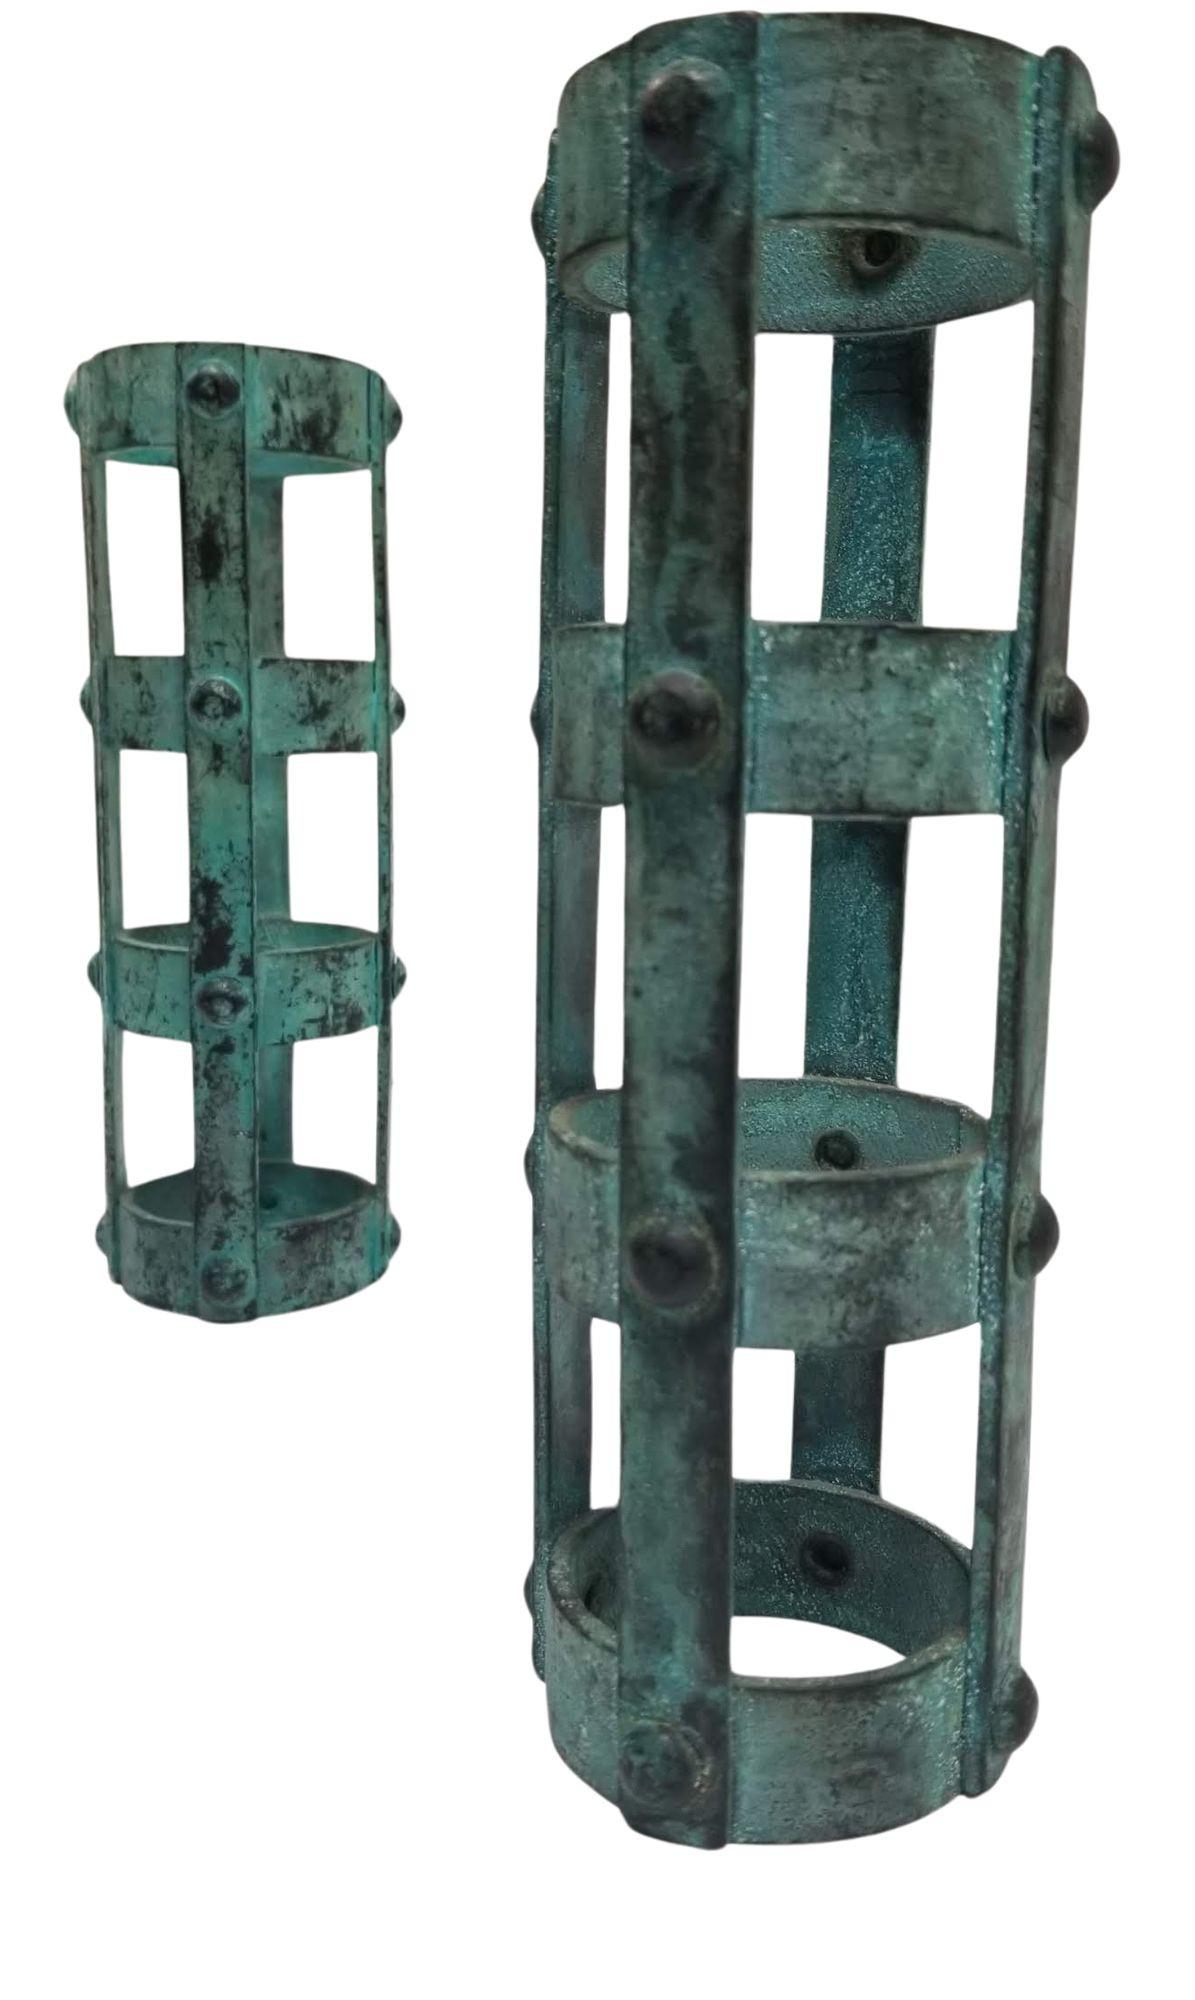 North American Set of 3 Brutalist style Candlestick Holders Cage Design For Sale